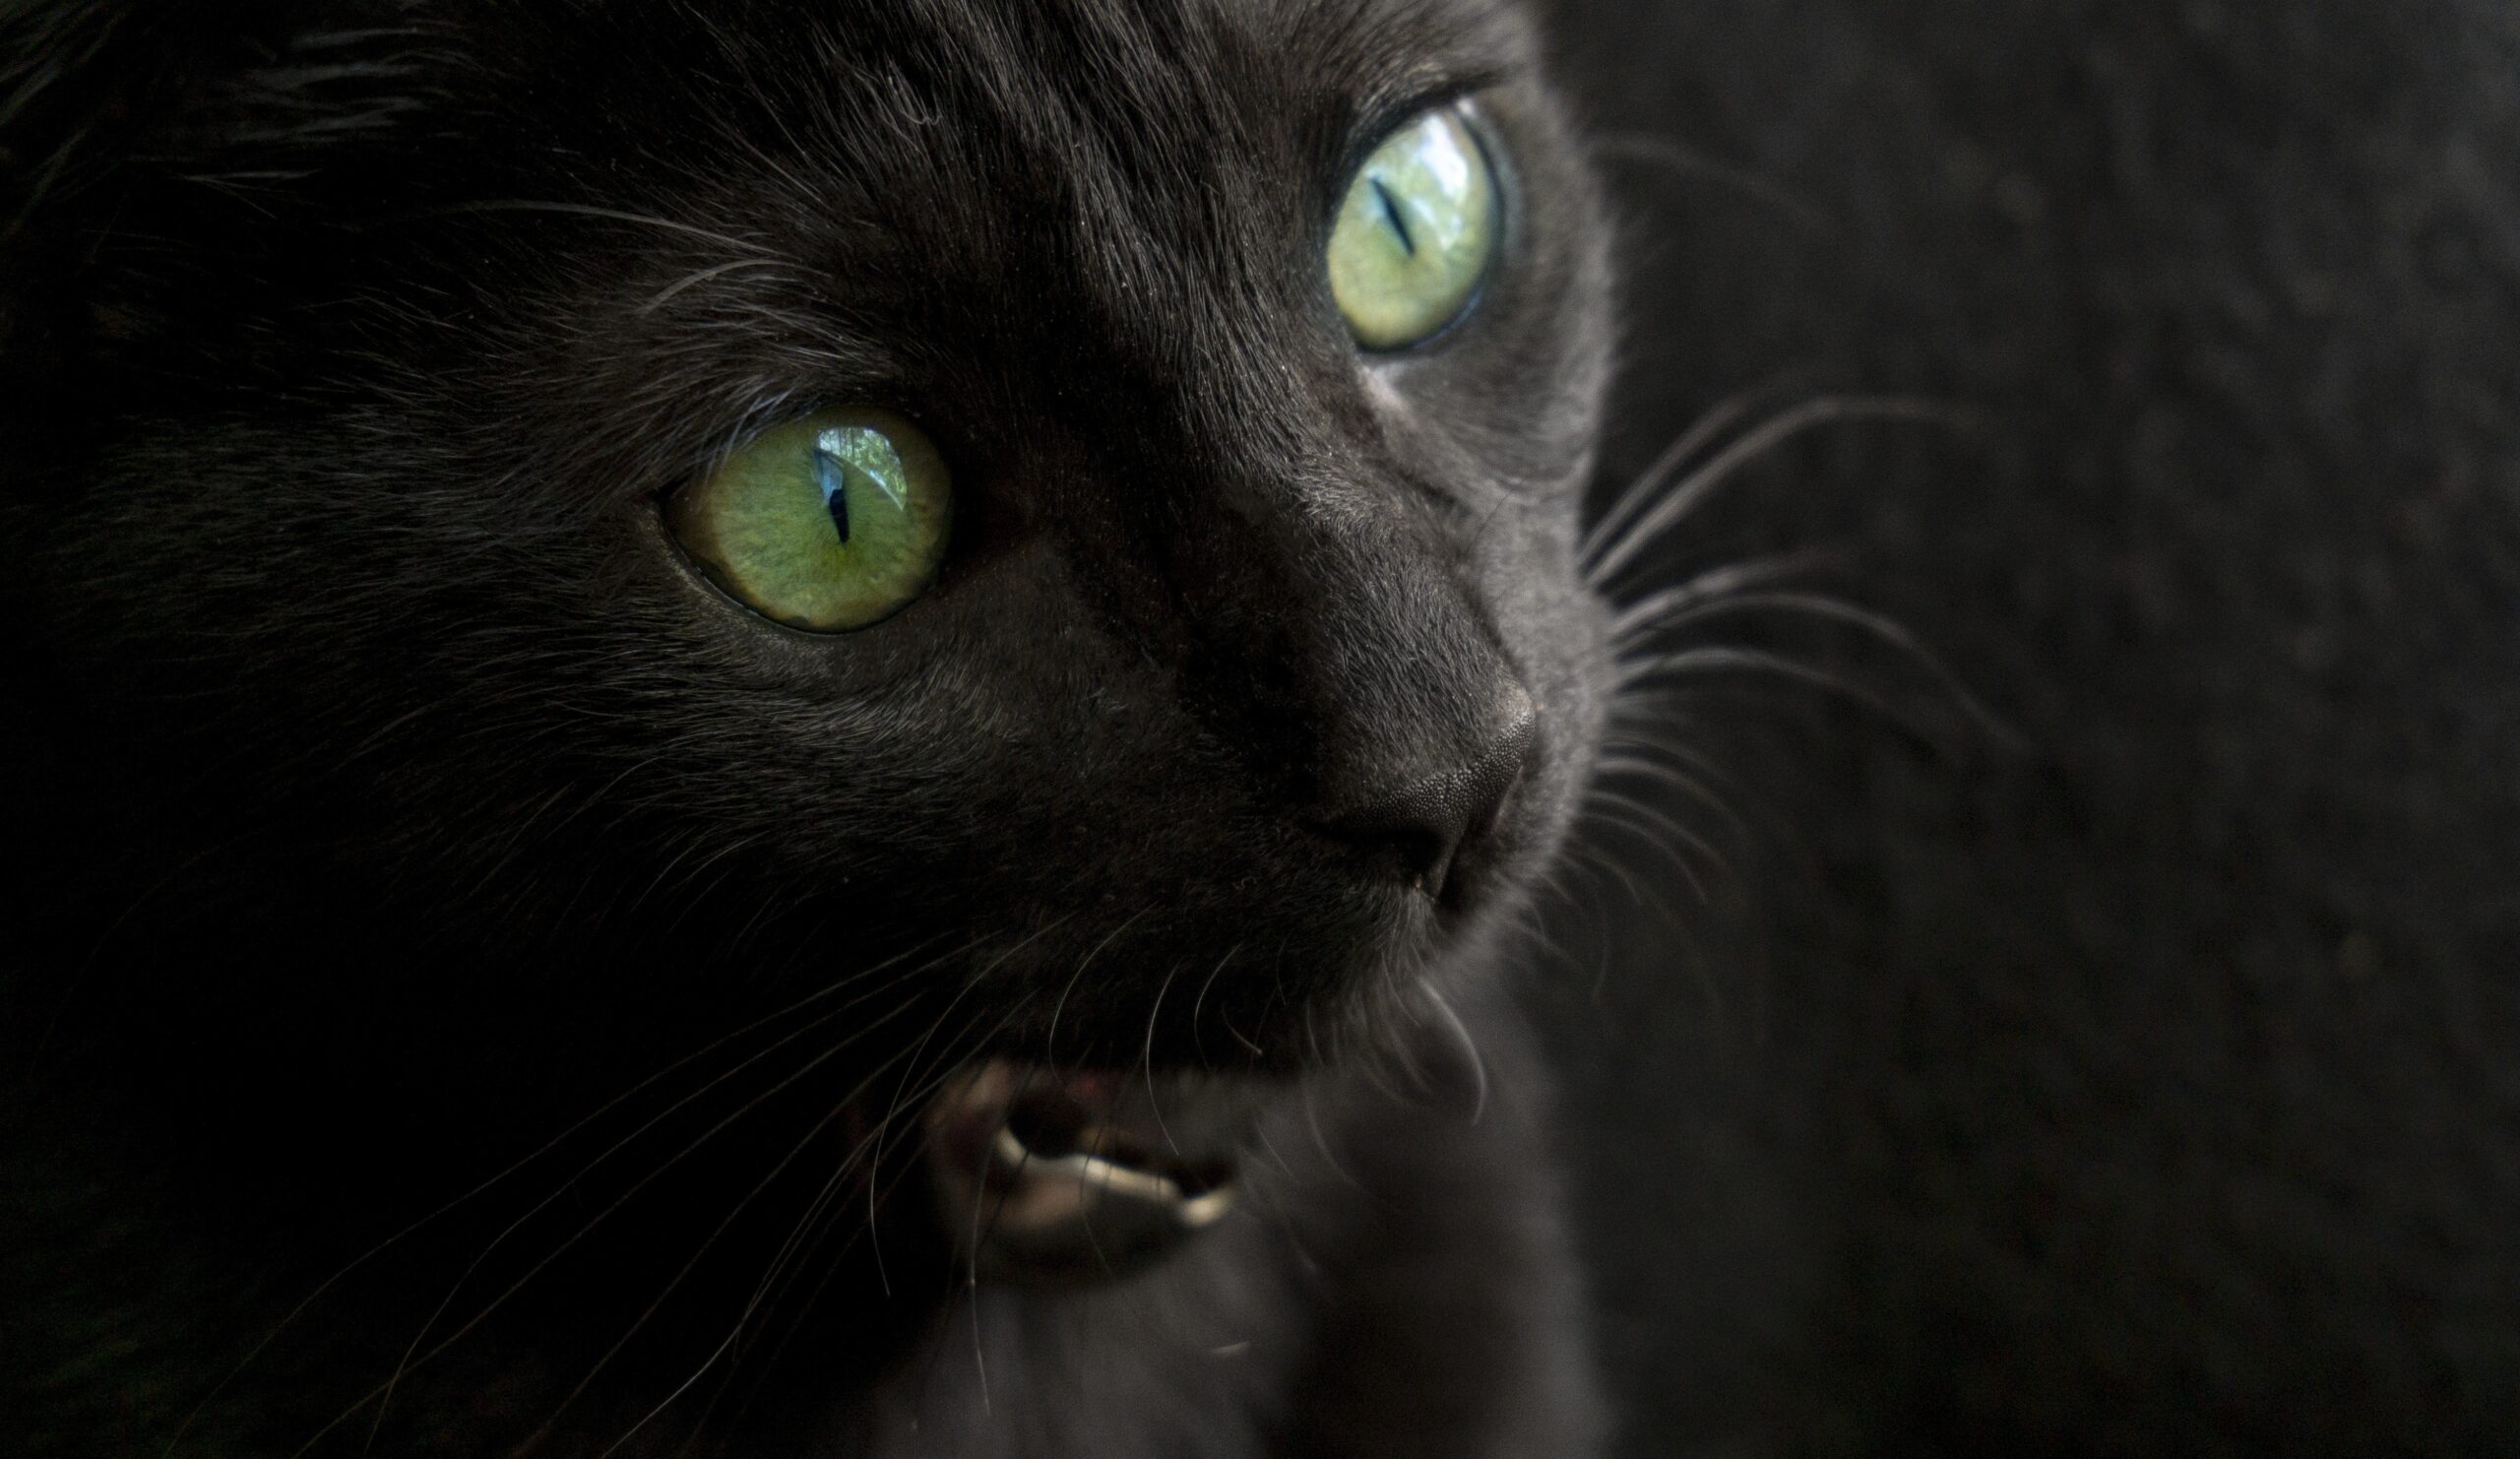 A black cat with green eyes in the dark meowing